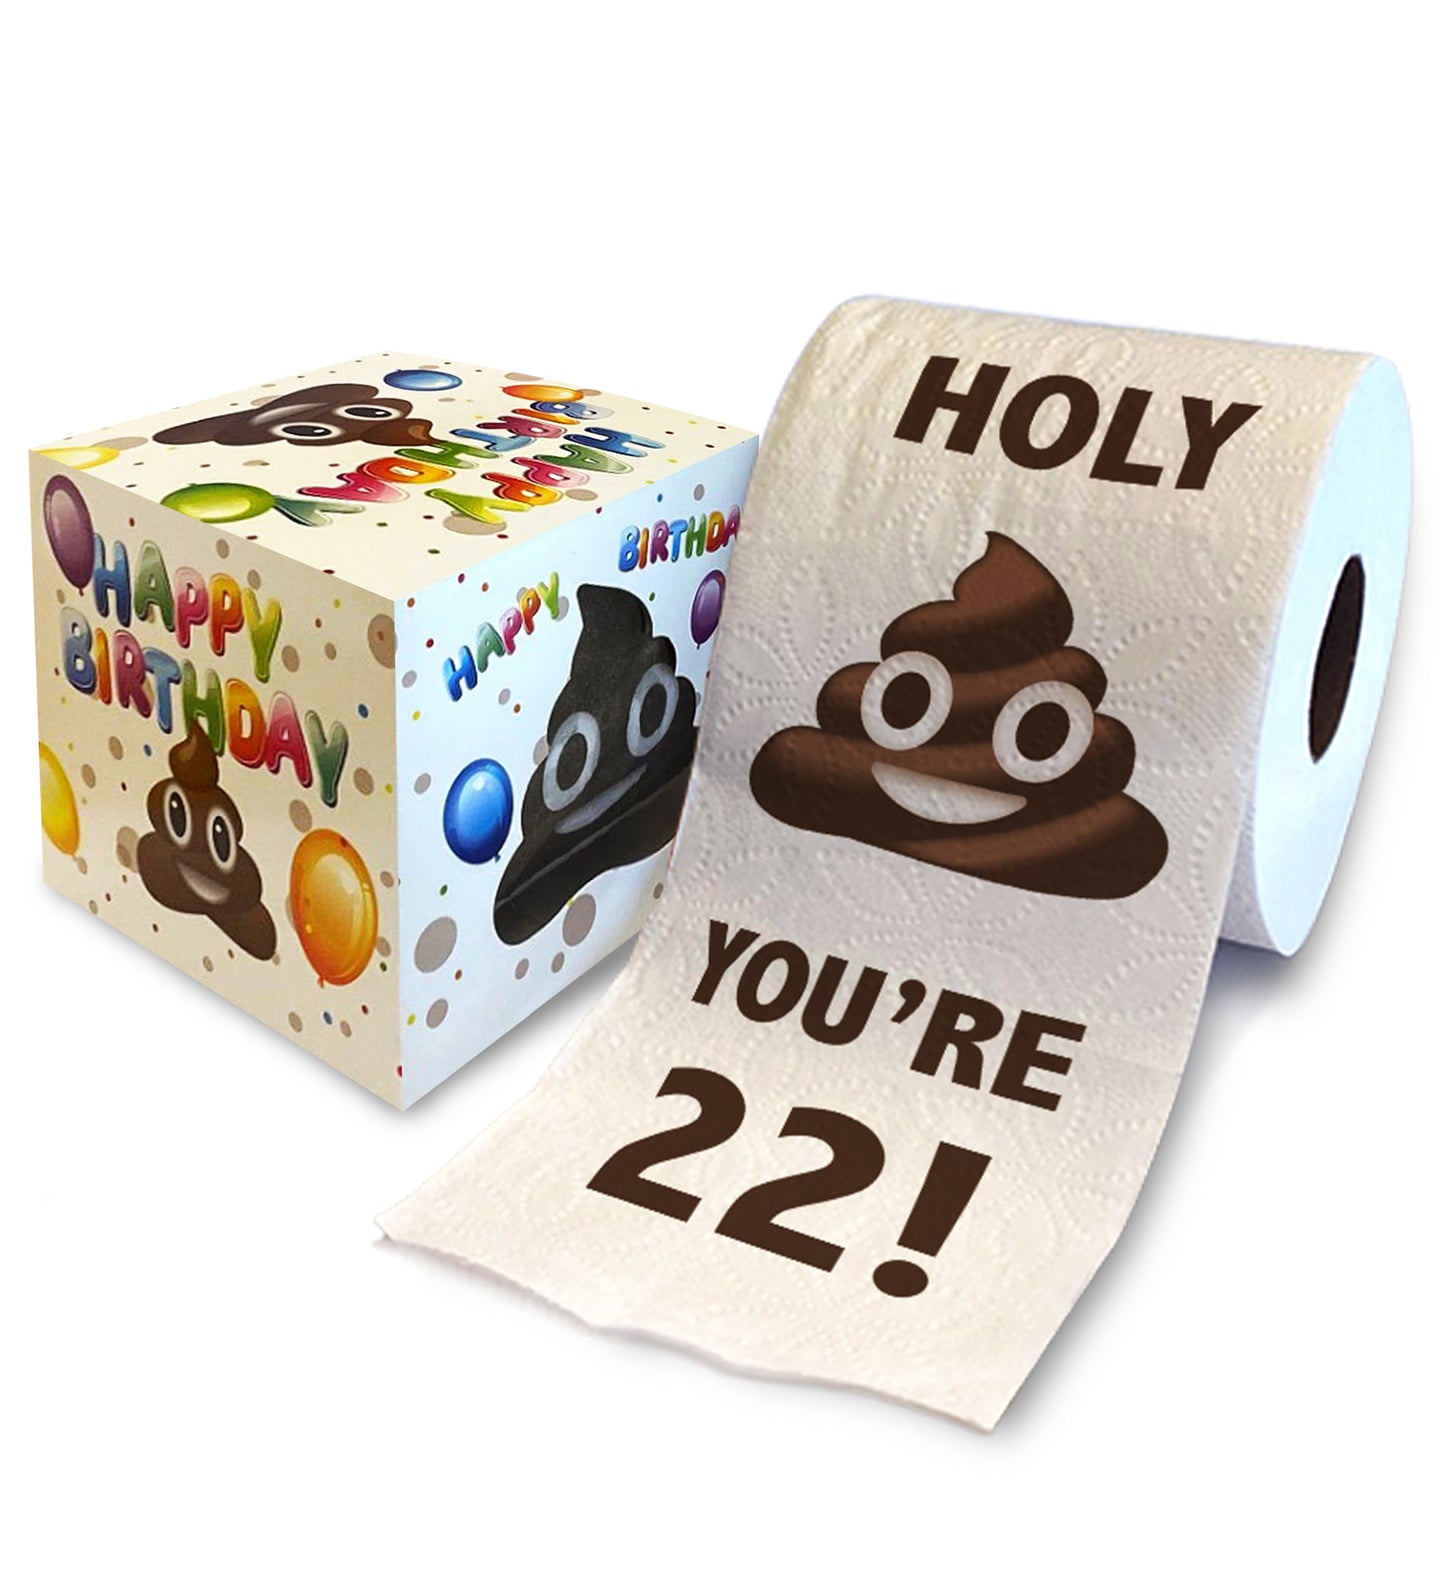 Printed TP Holy Poop You're 22 Printed Toilet Paper Funny Gag Gift – 500 Sheets